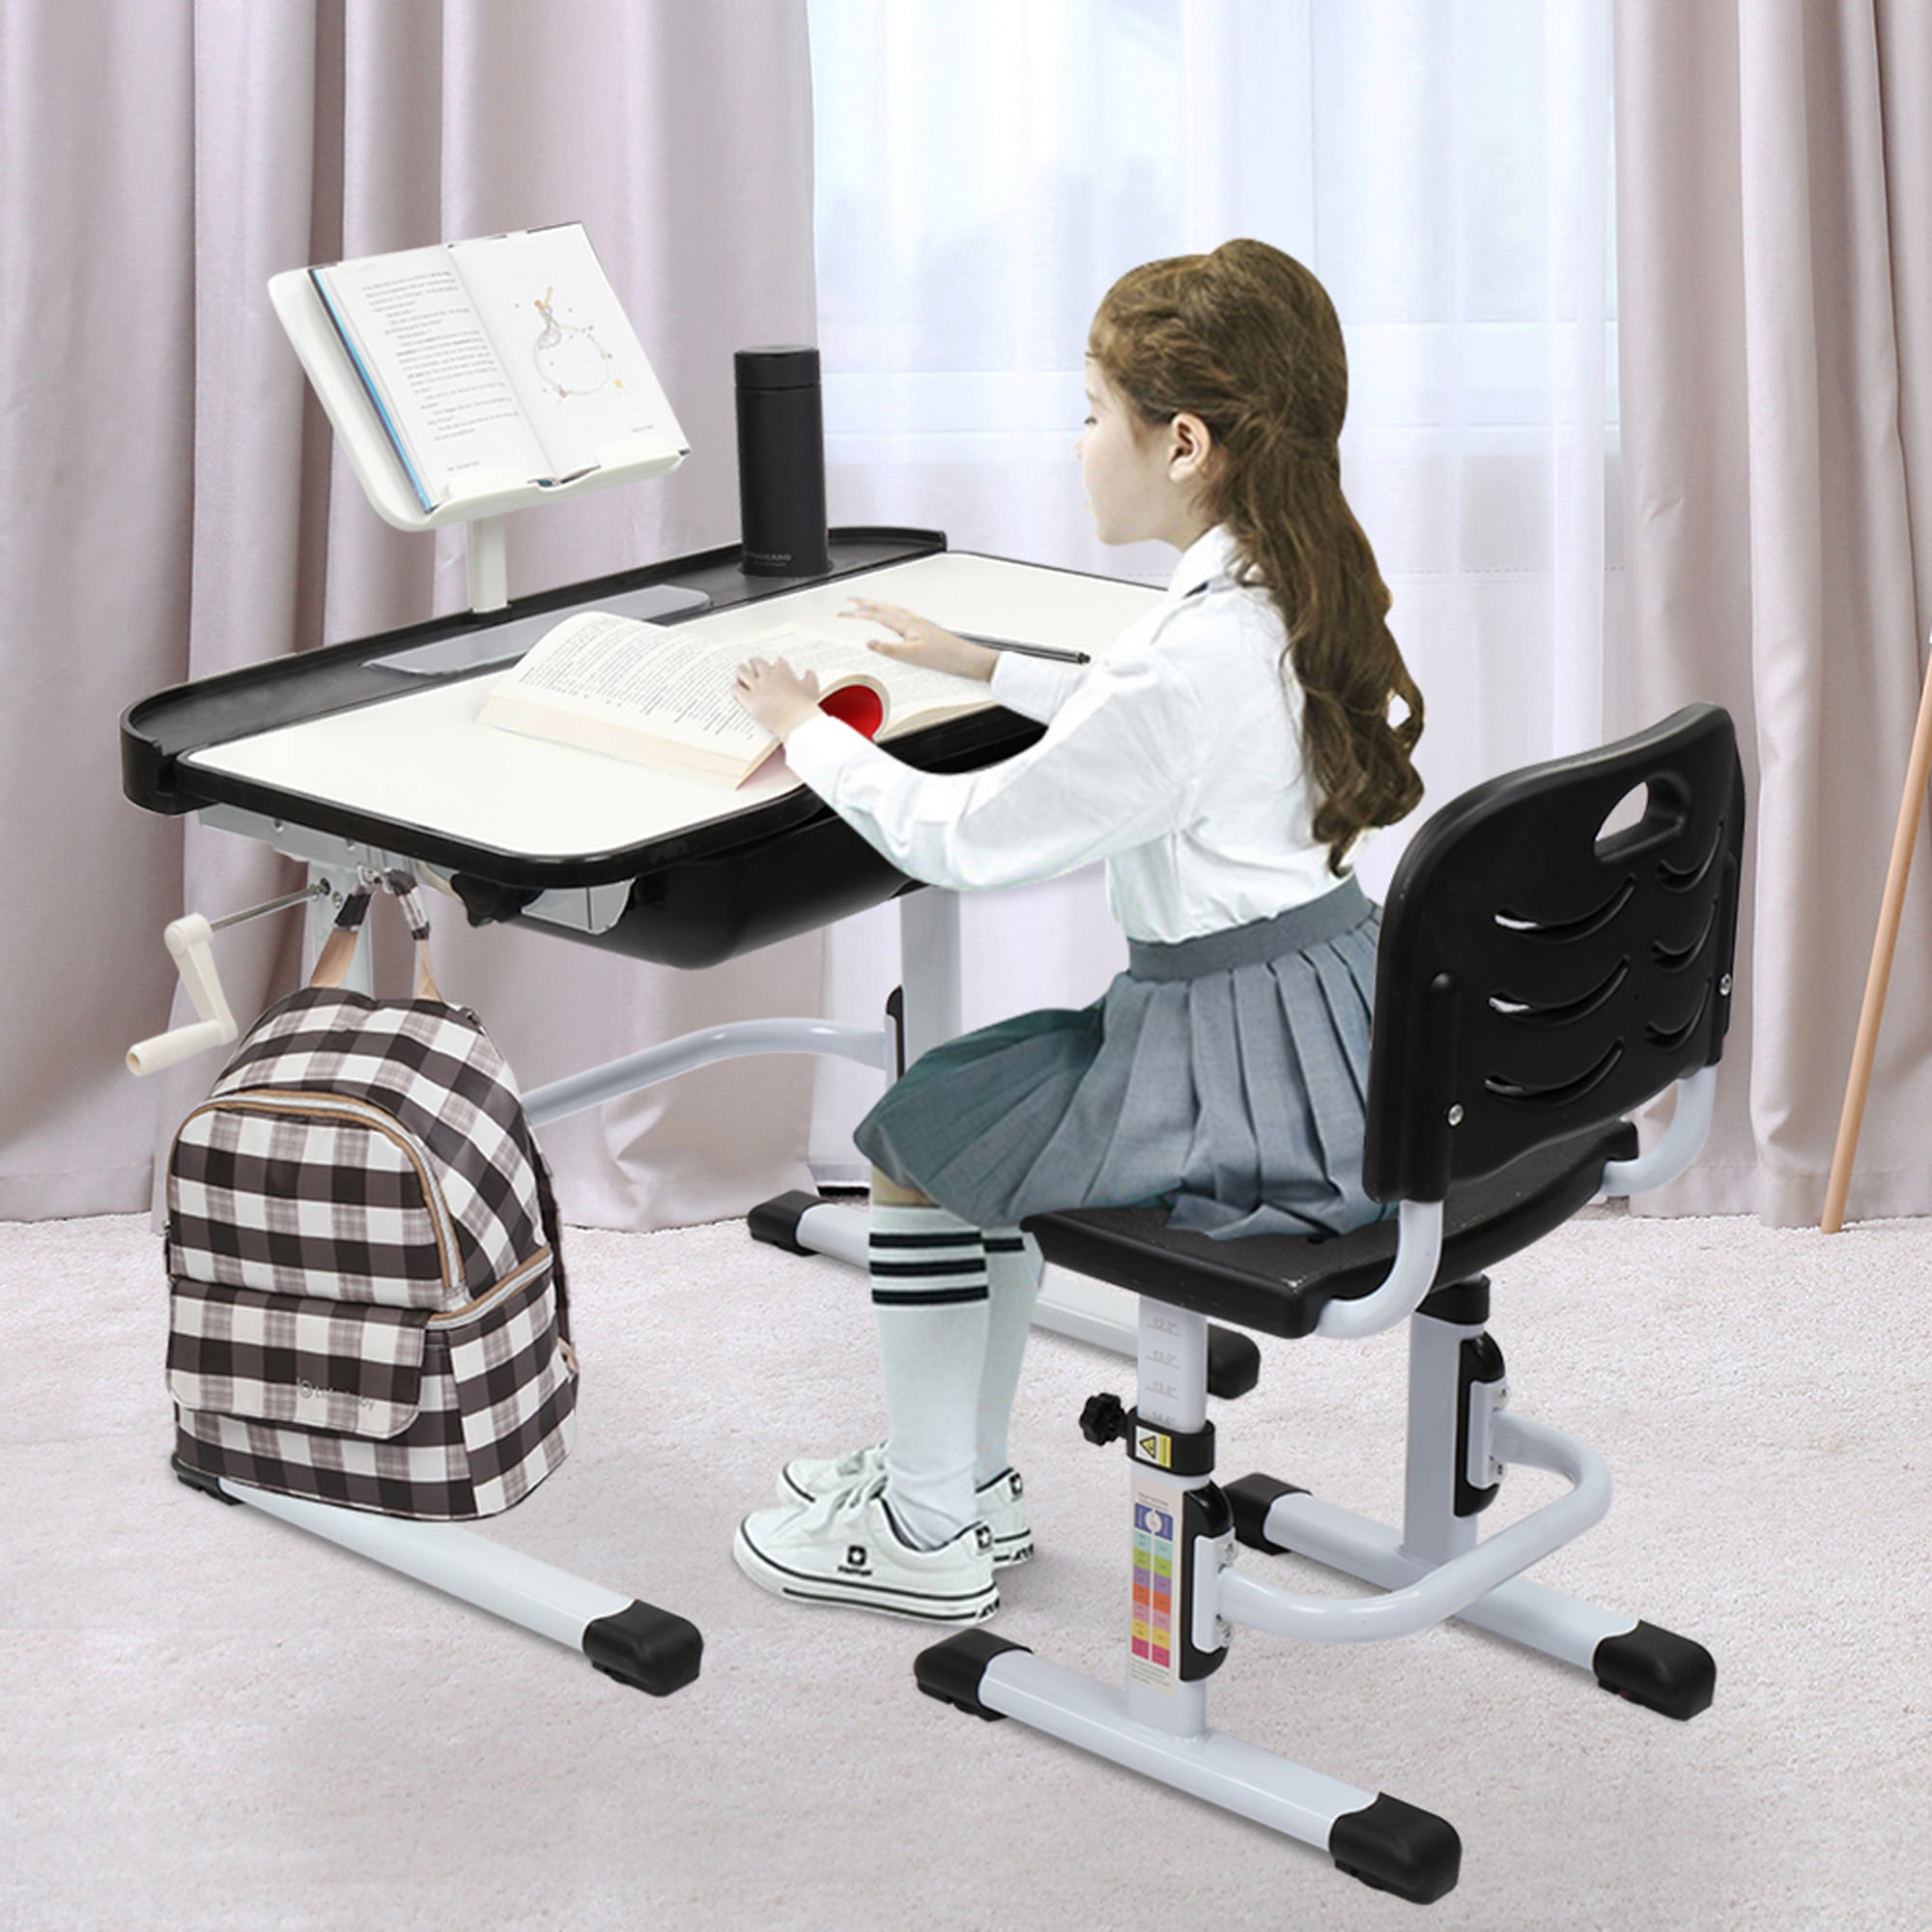 Blu Kids Desk and Chair Set Kids Art Activity Table Set with Adjustable Kids Study Chair Ergonomic Tilting Study Table Writing Desk with Chair and Drawer 